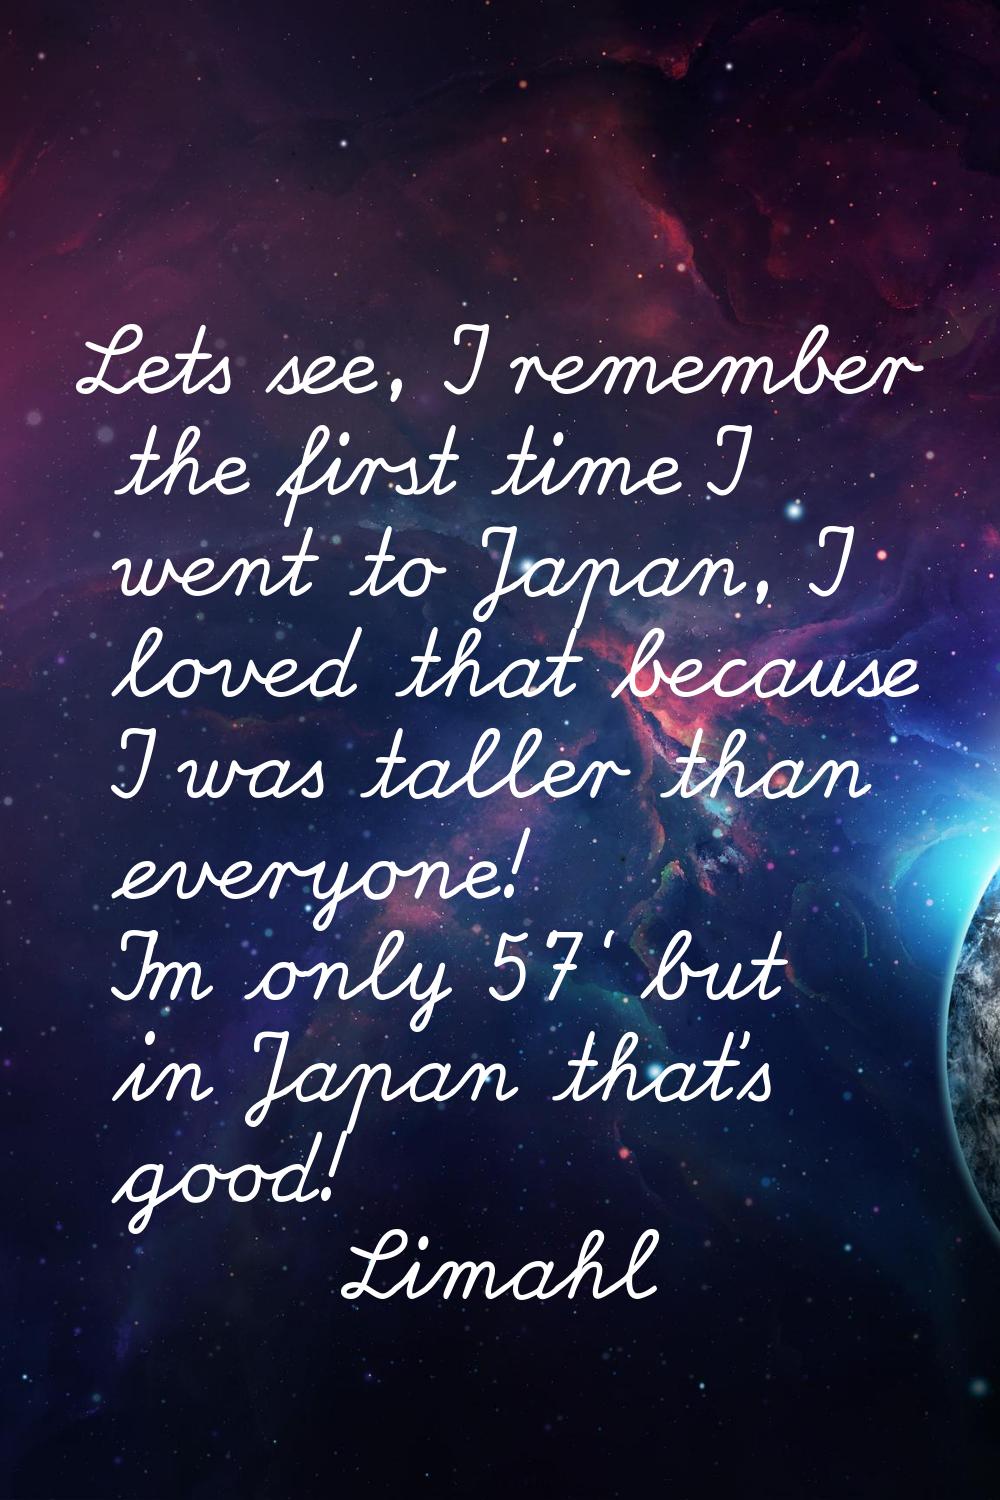 Lets see, I remember the first time I went to Japan, I loved that because I was taller than everyon